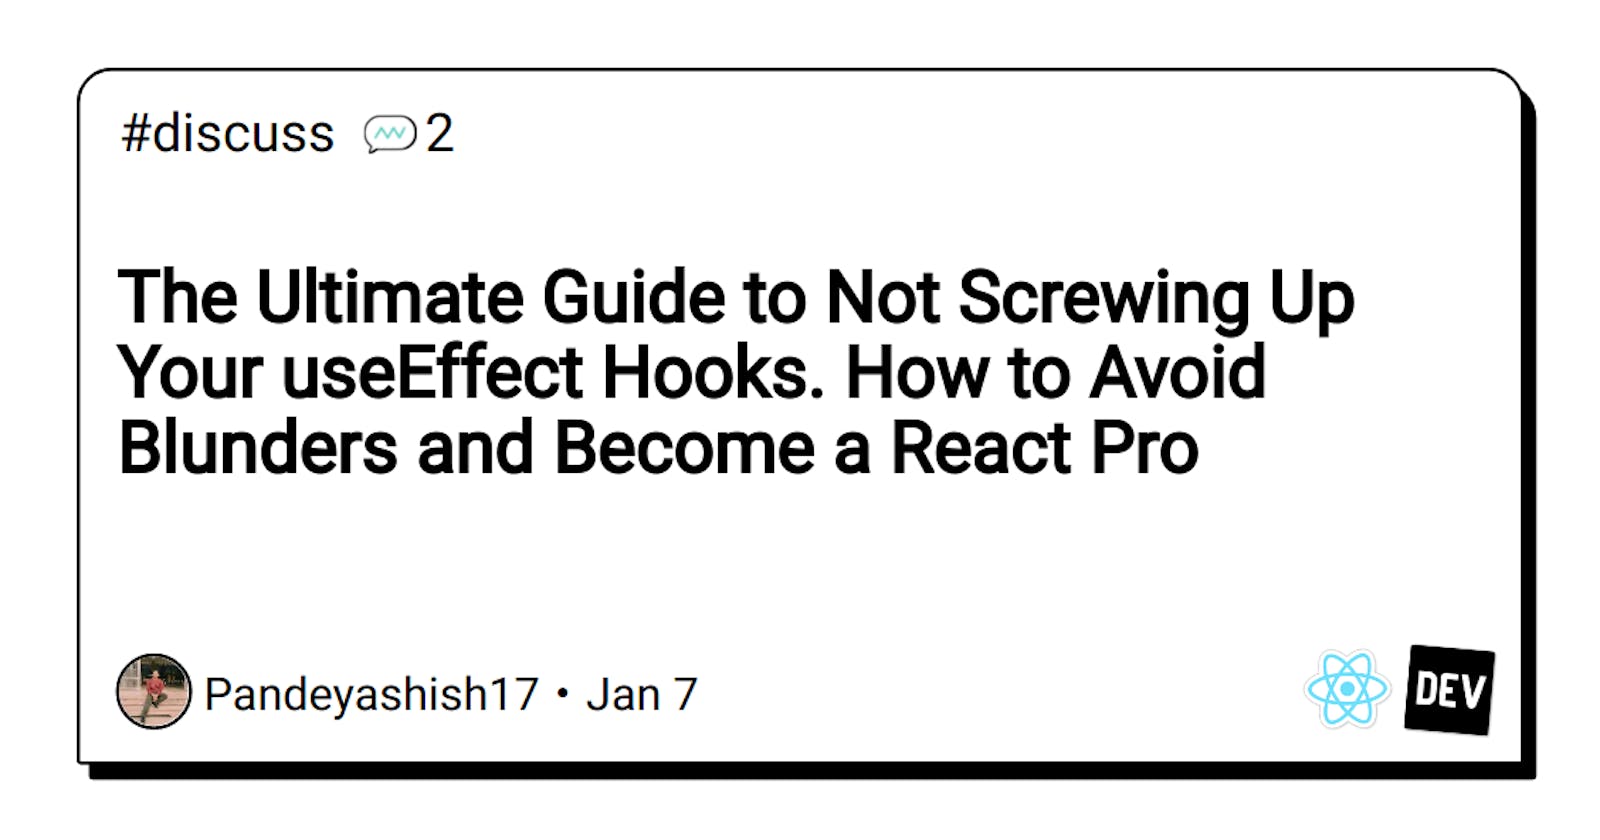 The Ultimate Guide to Not Screwing Up Your useEffect Hooks. How to Avoid Blunders and Become a React Pro